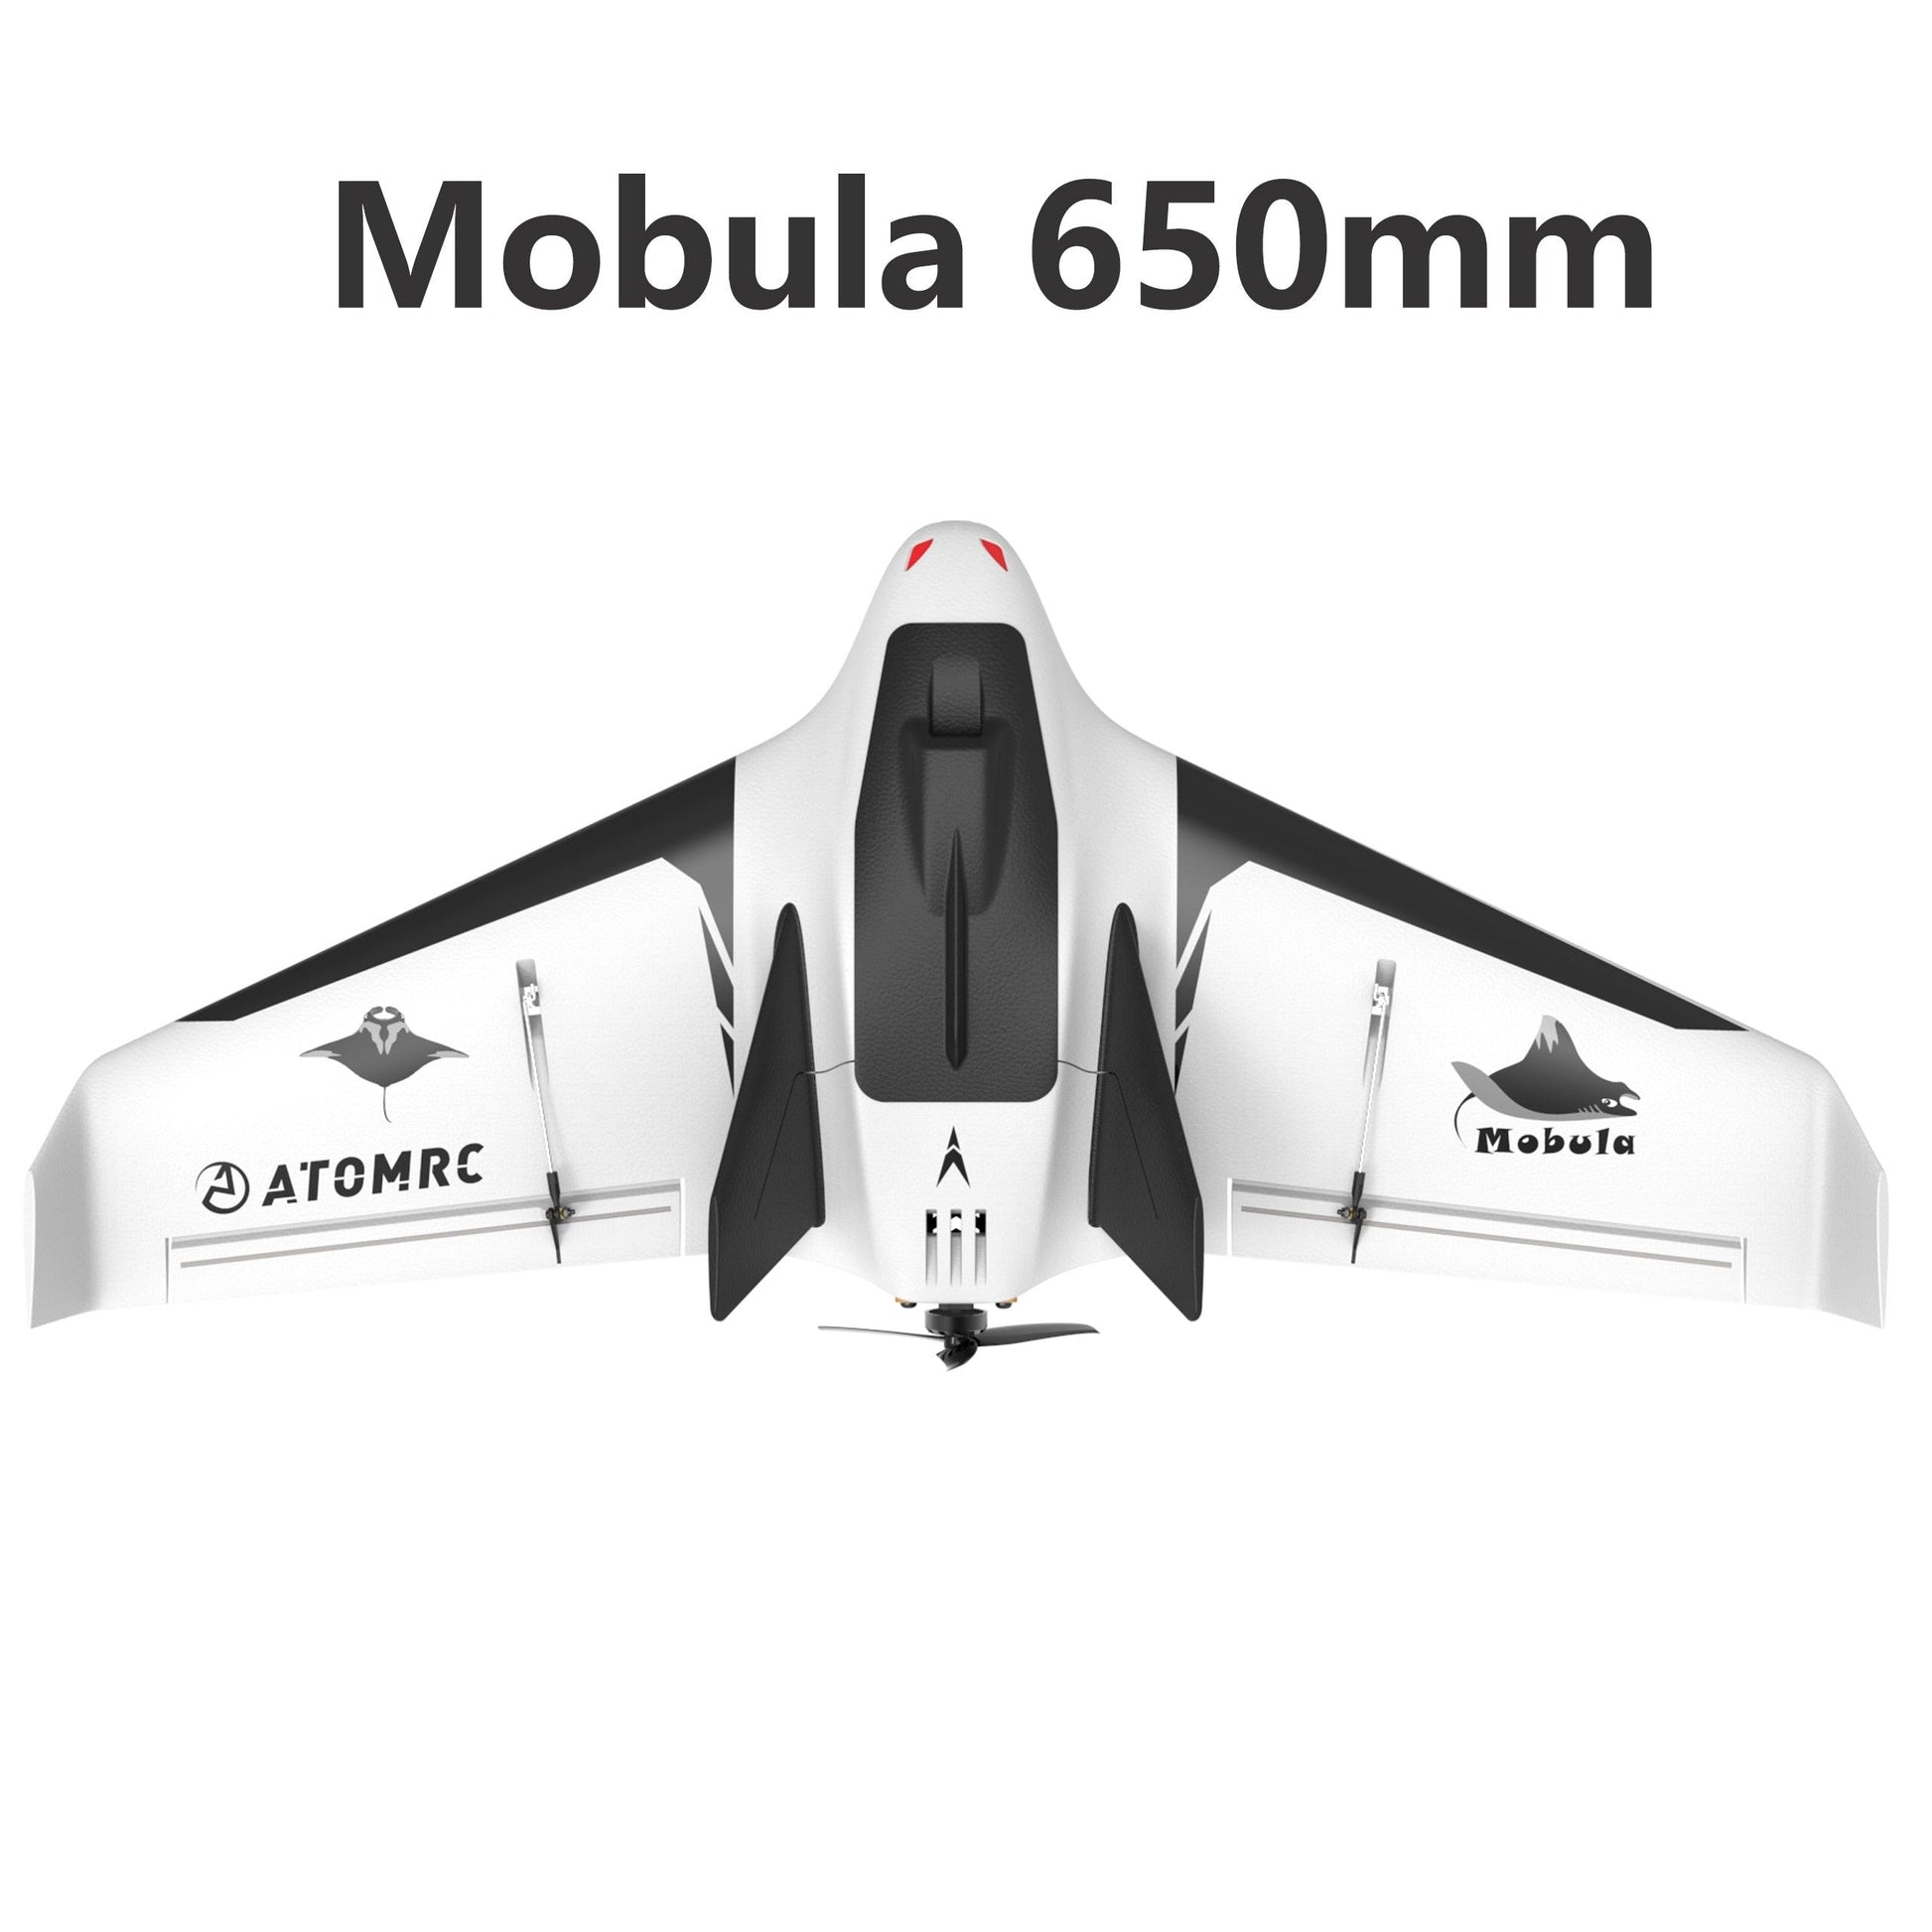 ATOMRC Mobula 650mm Wingspan Fixed Wing FPV Aircraft RC Airplane KIT PNP FPV PNP Outdoor Flying Wing - RCDrone